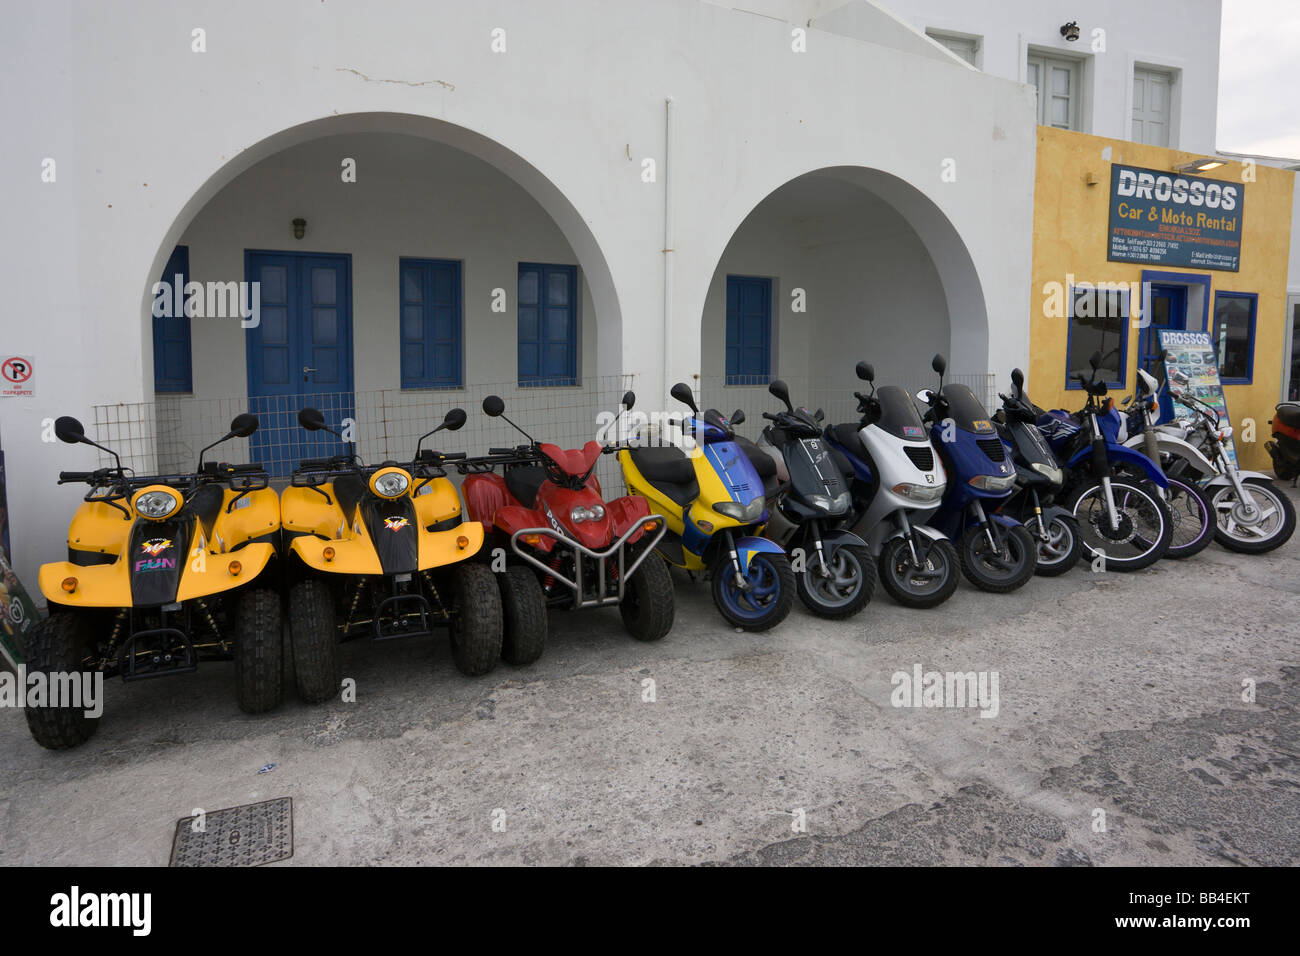 A Peugeot speedfight 2 french scooter parked on the seafront Santorini  greece Stock Photo - Alamy